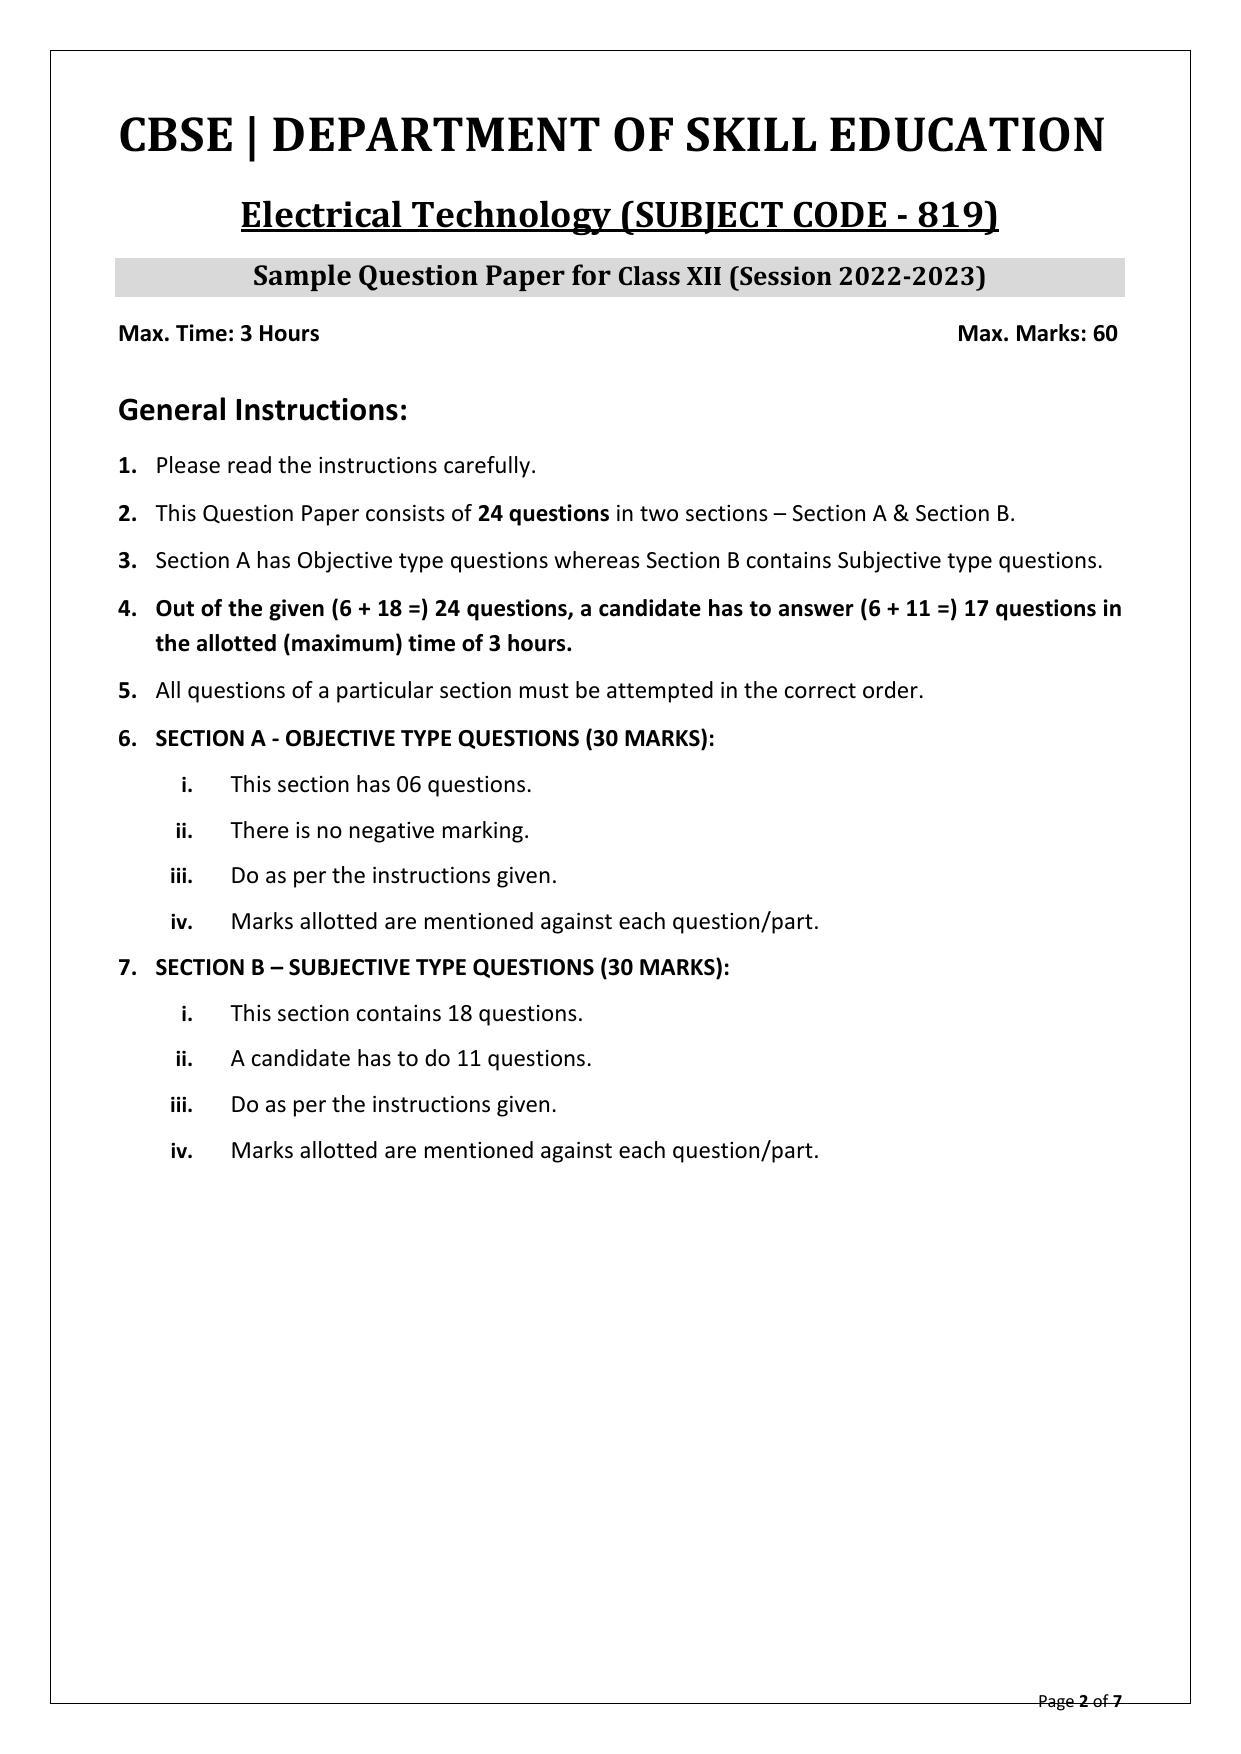 CBSE Class 10 Electrical Technology (Skill Education) Sample Papers 2023 - Page 2